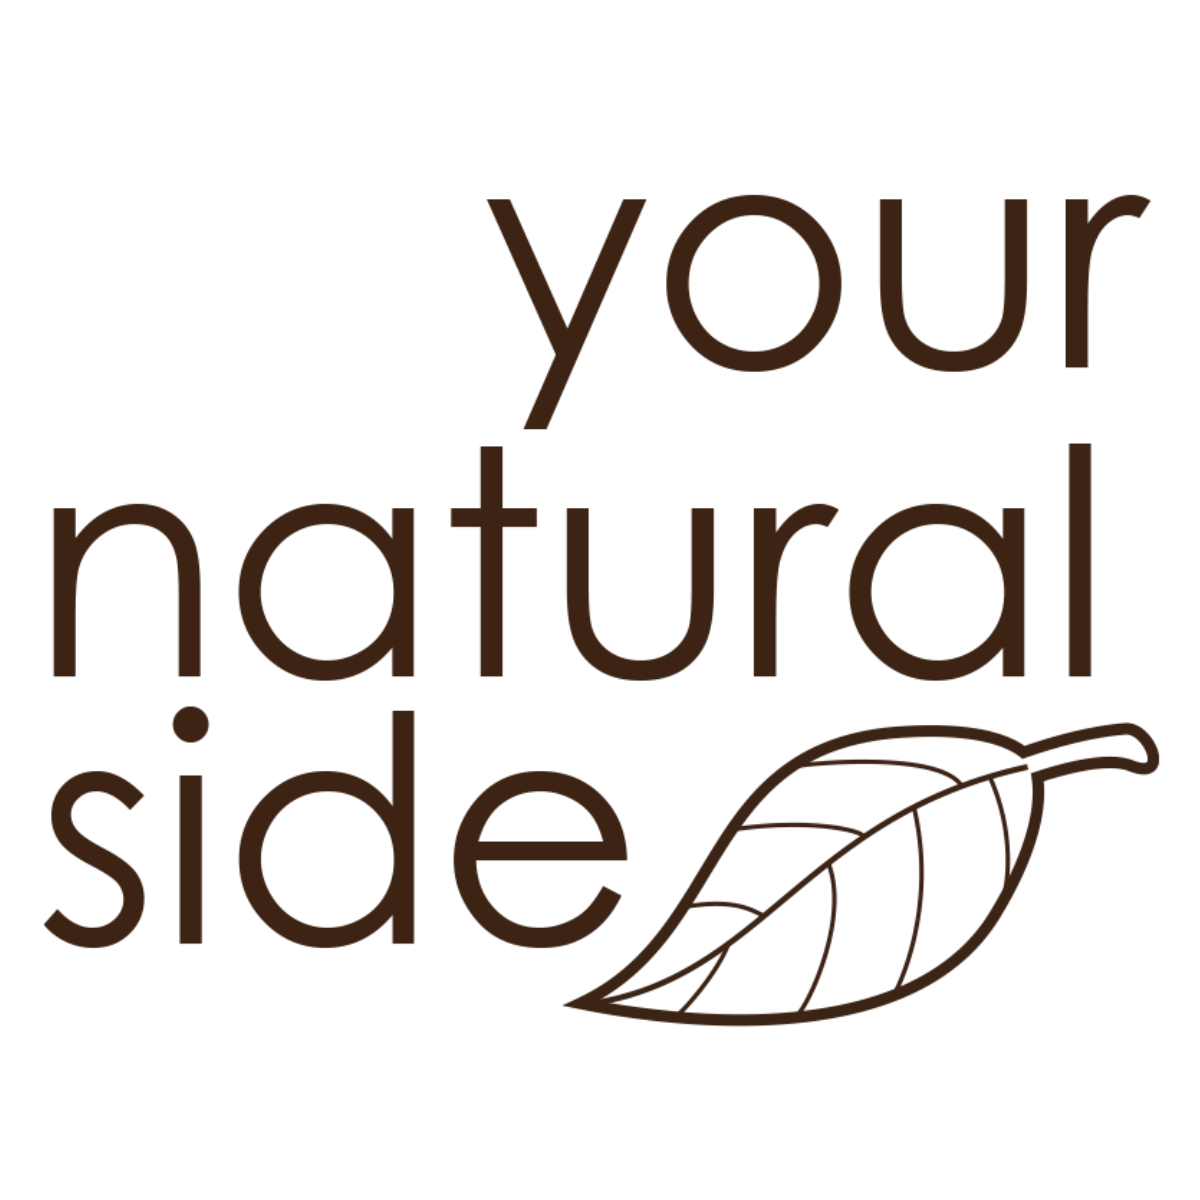 Your Natural Side